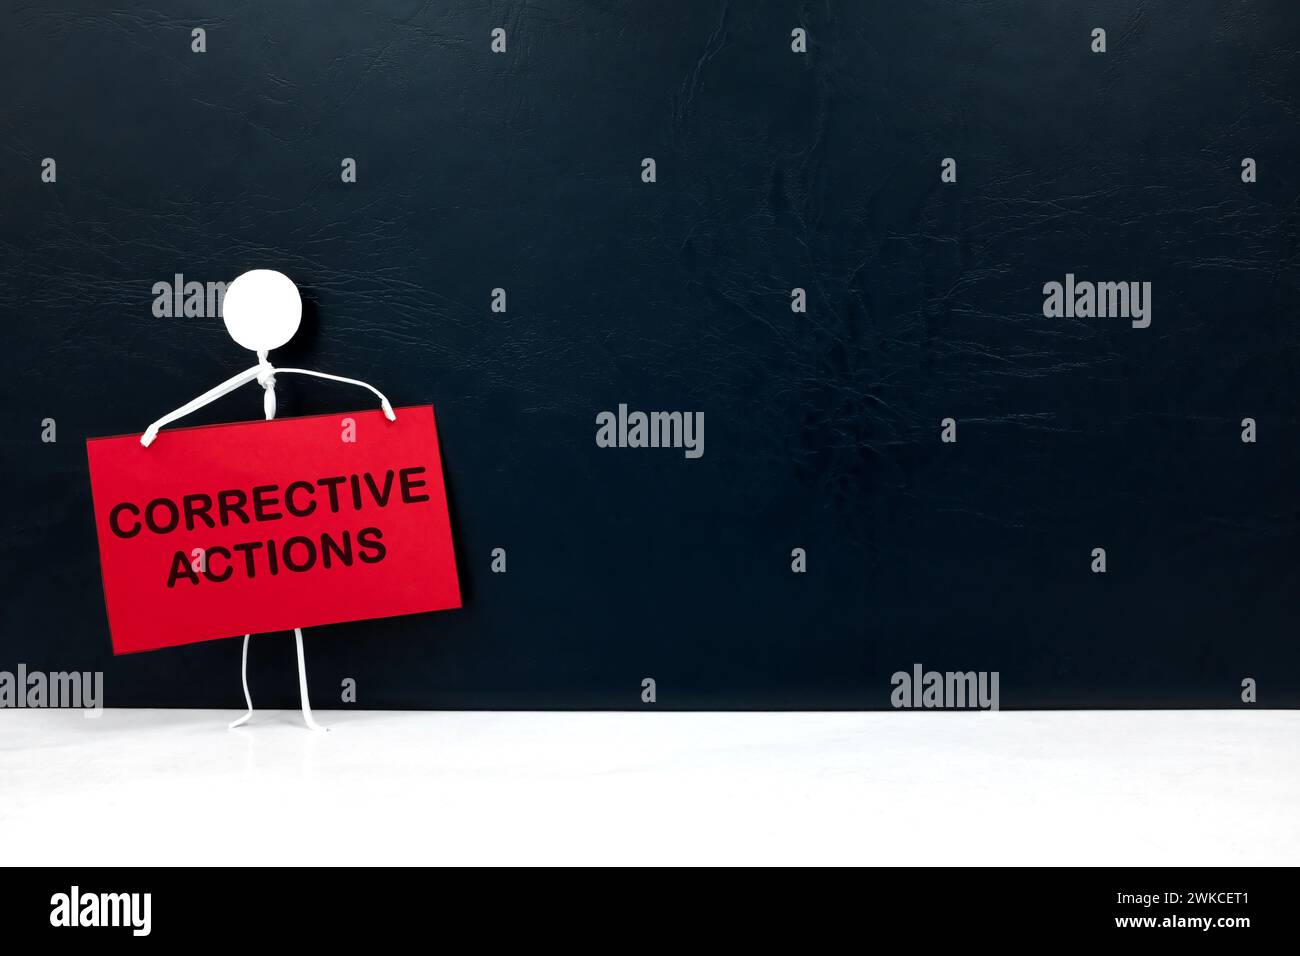 Stick figure holding corrective action placard in black background. Audit findings and root cause analysis concept. Stock Photo